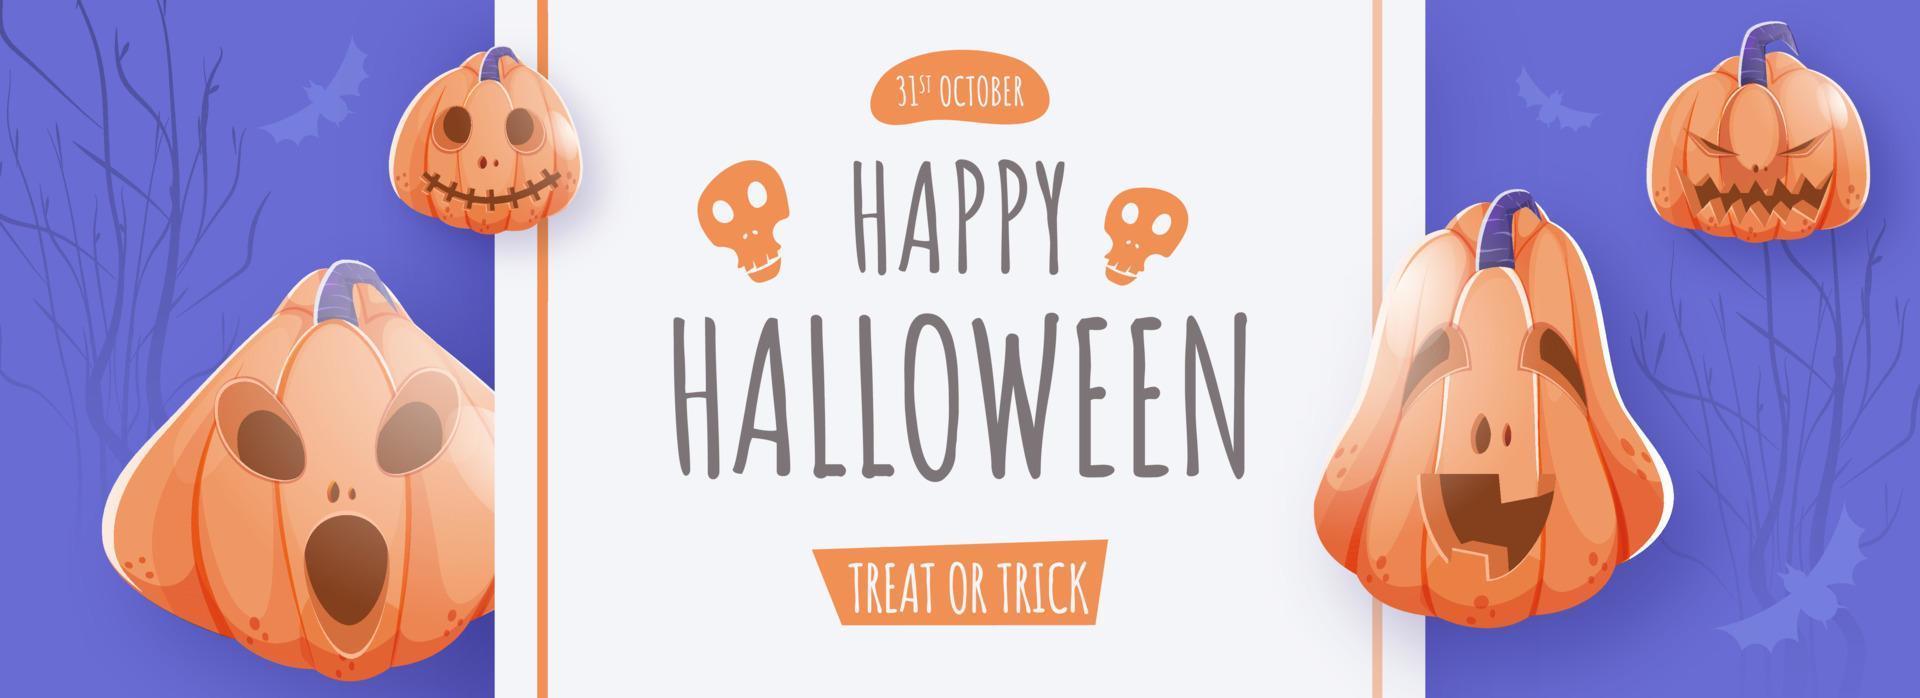 Happy Halloween Header or Banner Design with Jack-O-Lanterns and Flying Bats on Violet Blue and White Background. vector